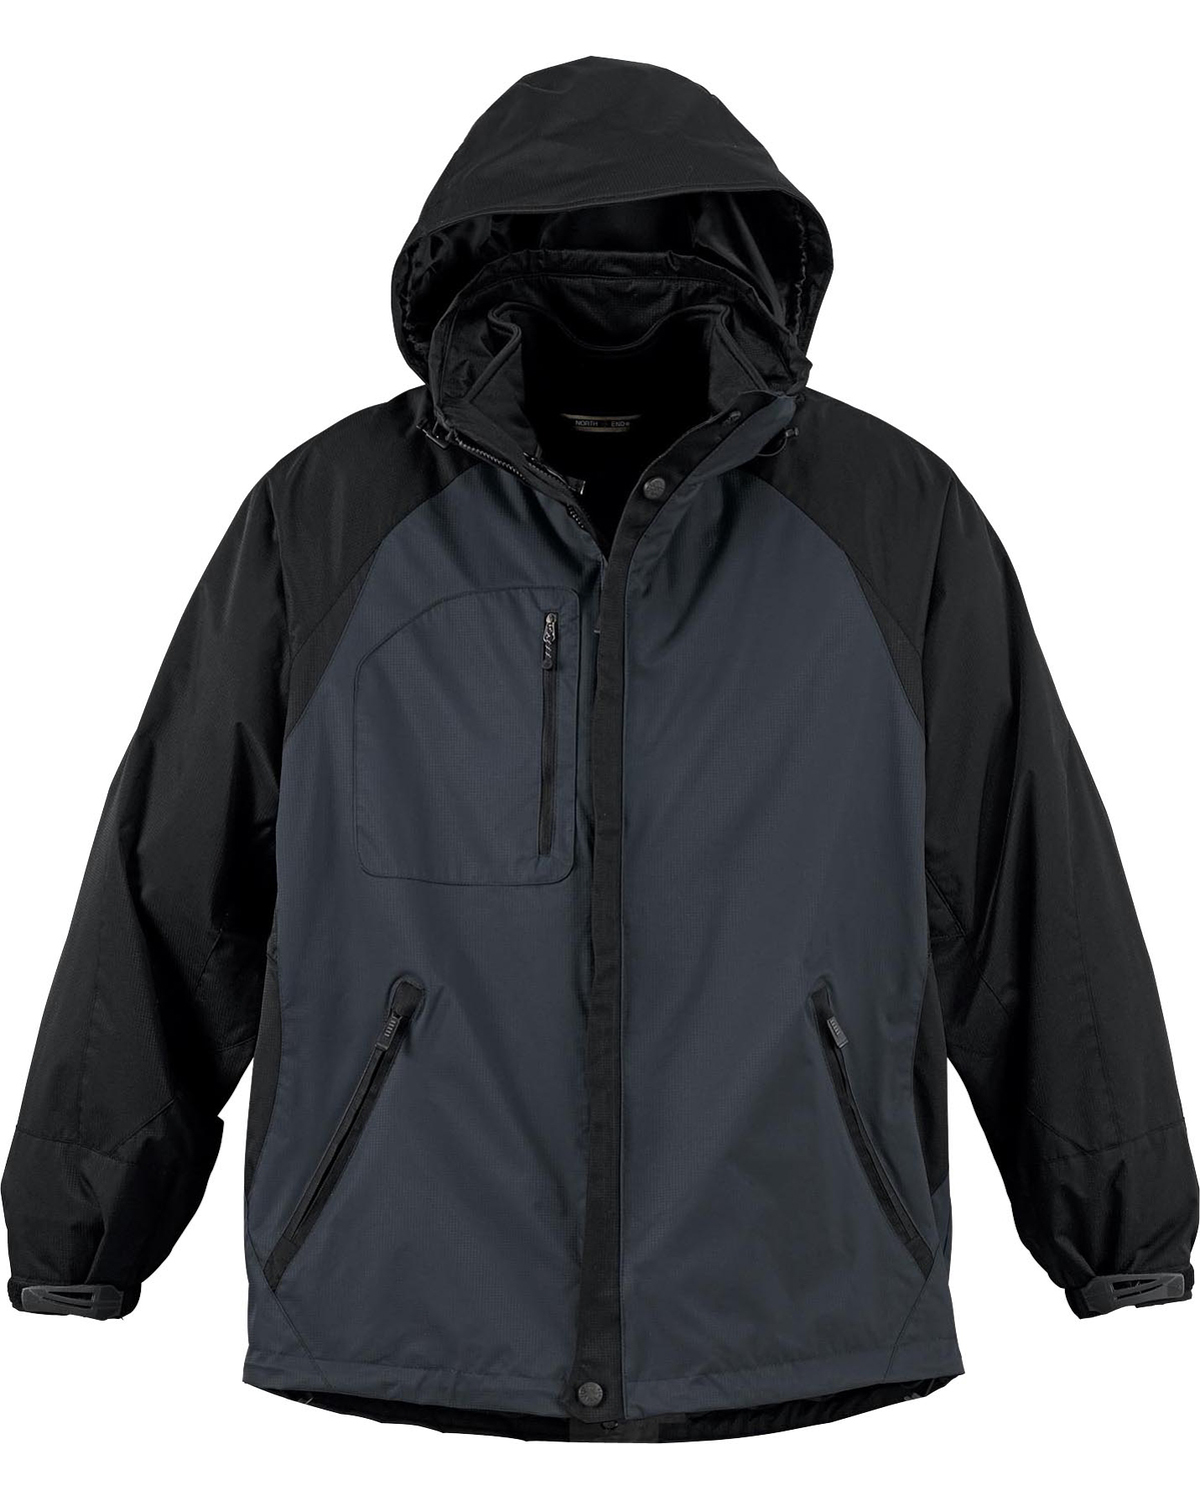 Ash City - North End Men's Performance 3-In-1 Seam-Sealed Mid-Length Jacket Black